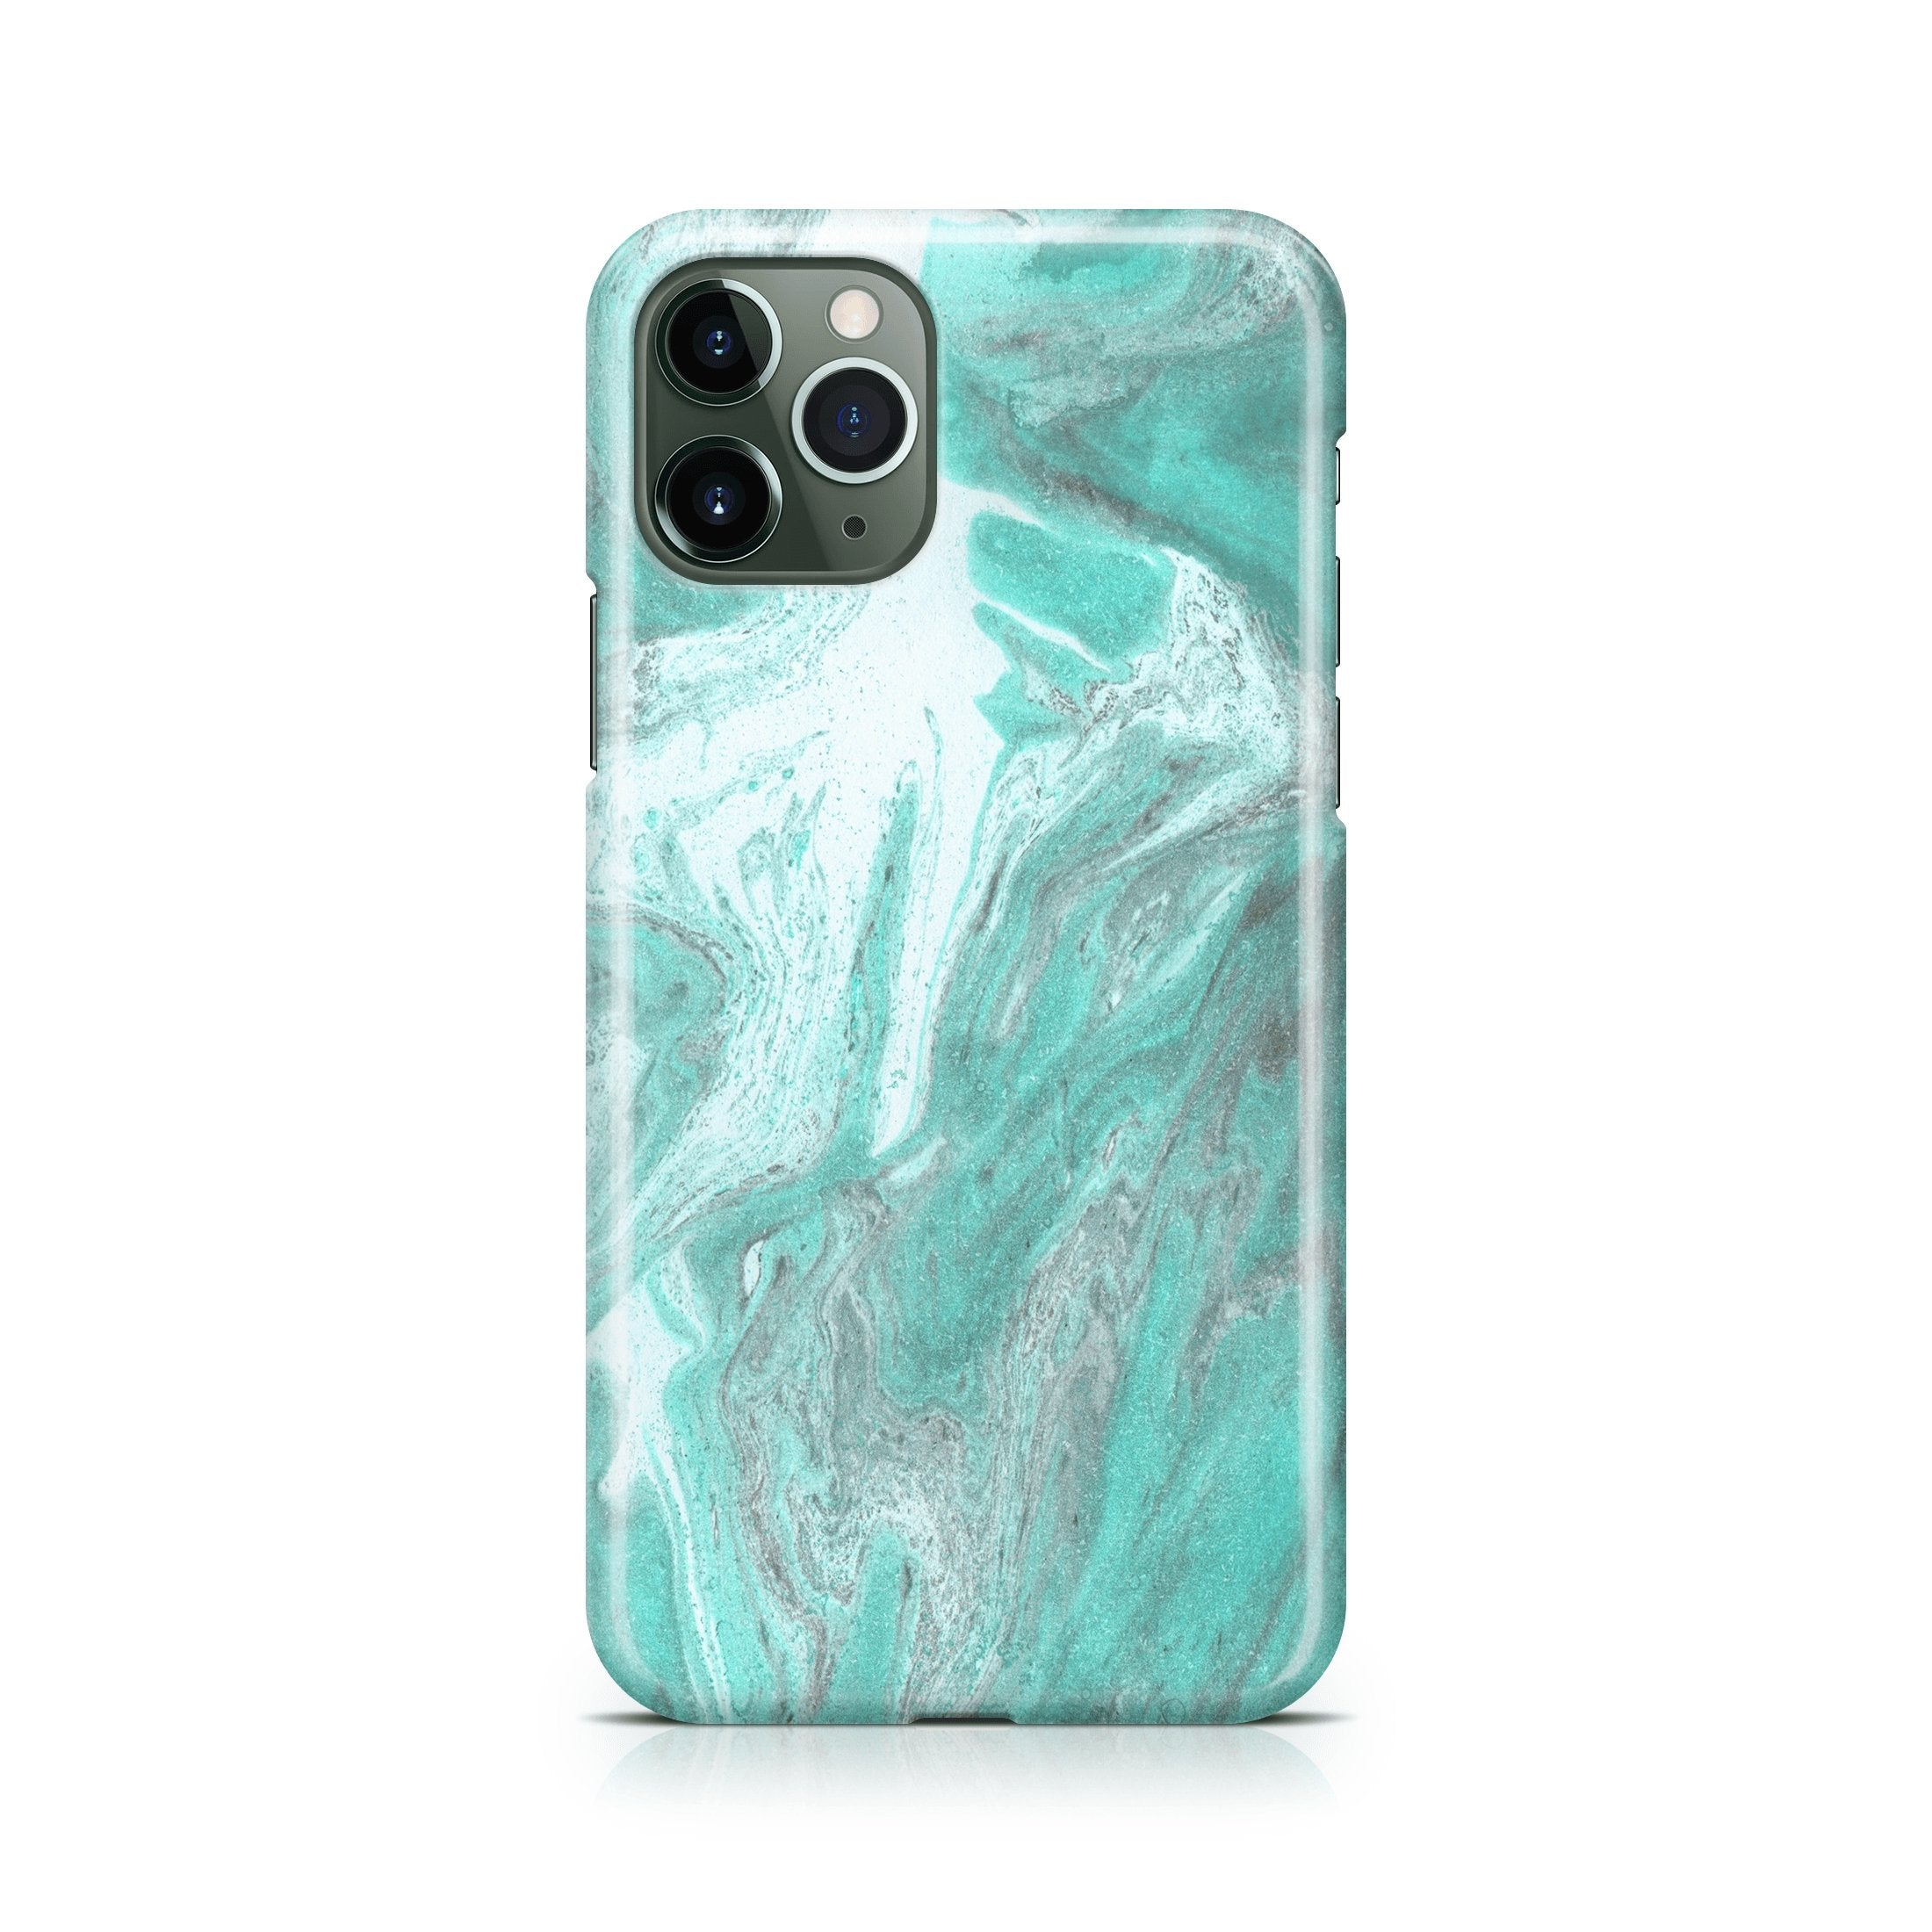 Aqua Green Marble - iPhone phone case designs by CaseSwagger